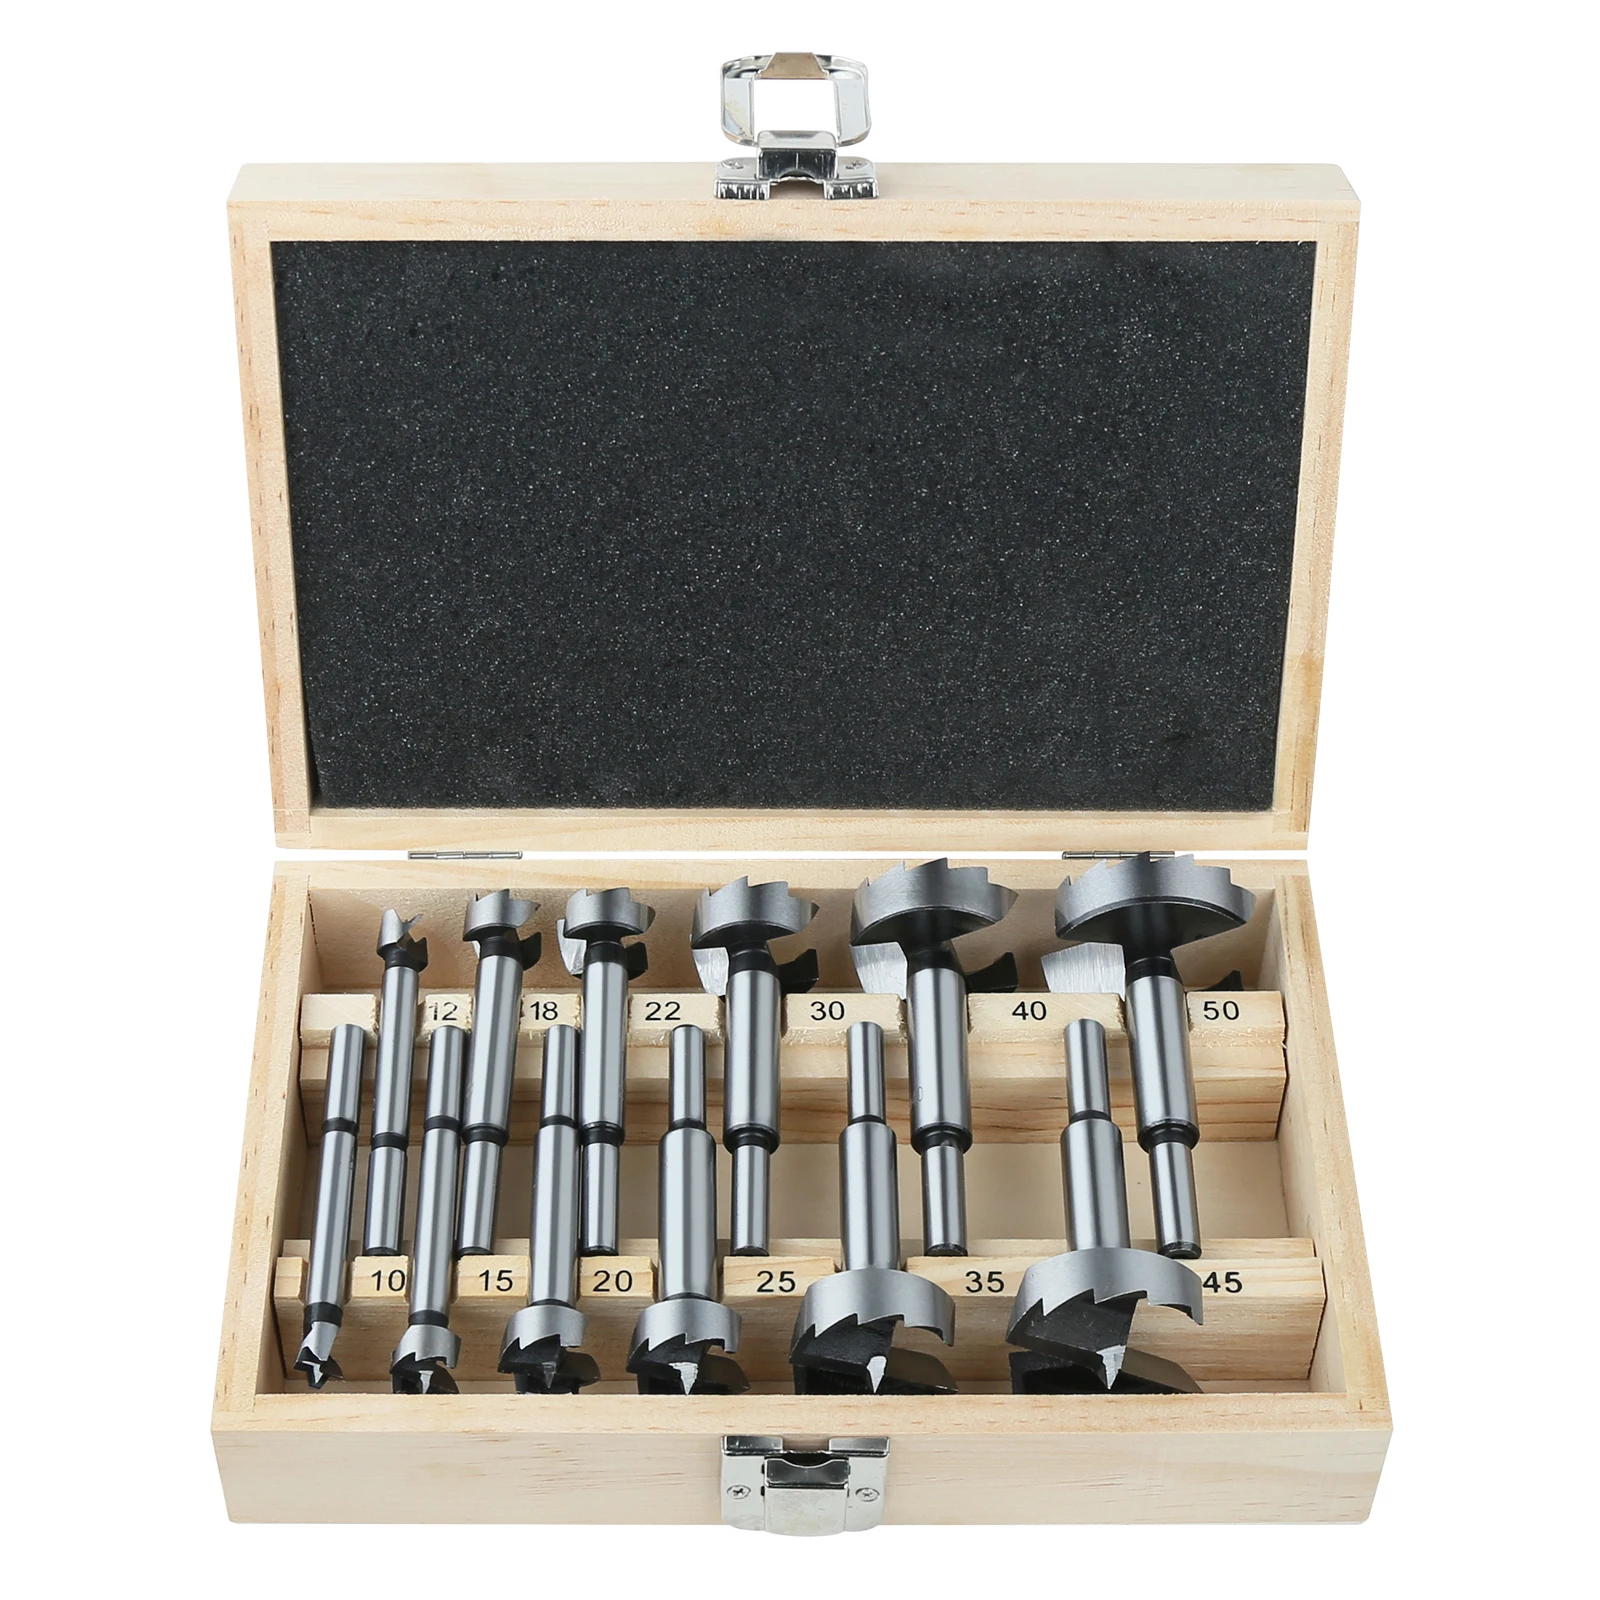 HEDA 12Pcs/Set 10-50mm Forstner Woodworking Tools Hole Saw Hinge Boring Drill Bits Round Shank High Carbon Steel Cutter